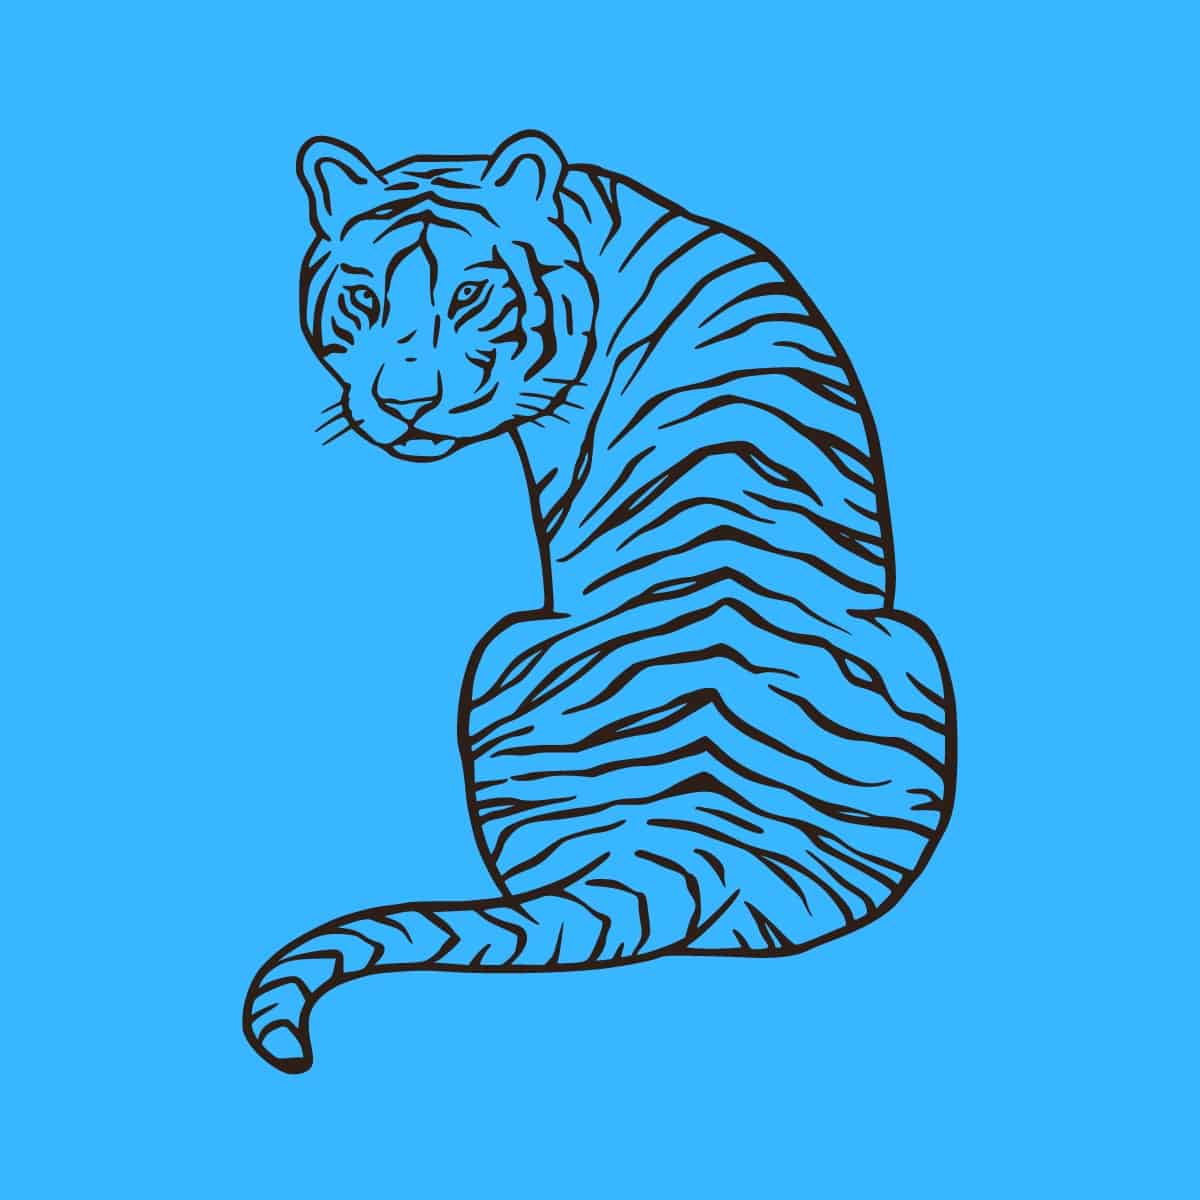 Cartoon graphic of a black outlined tiger with stripes on a blue background.